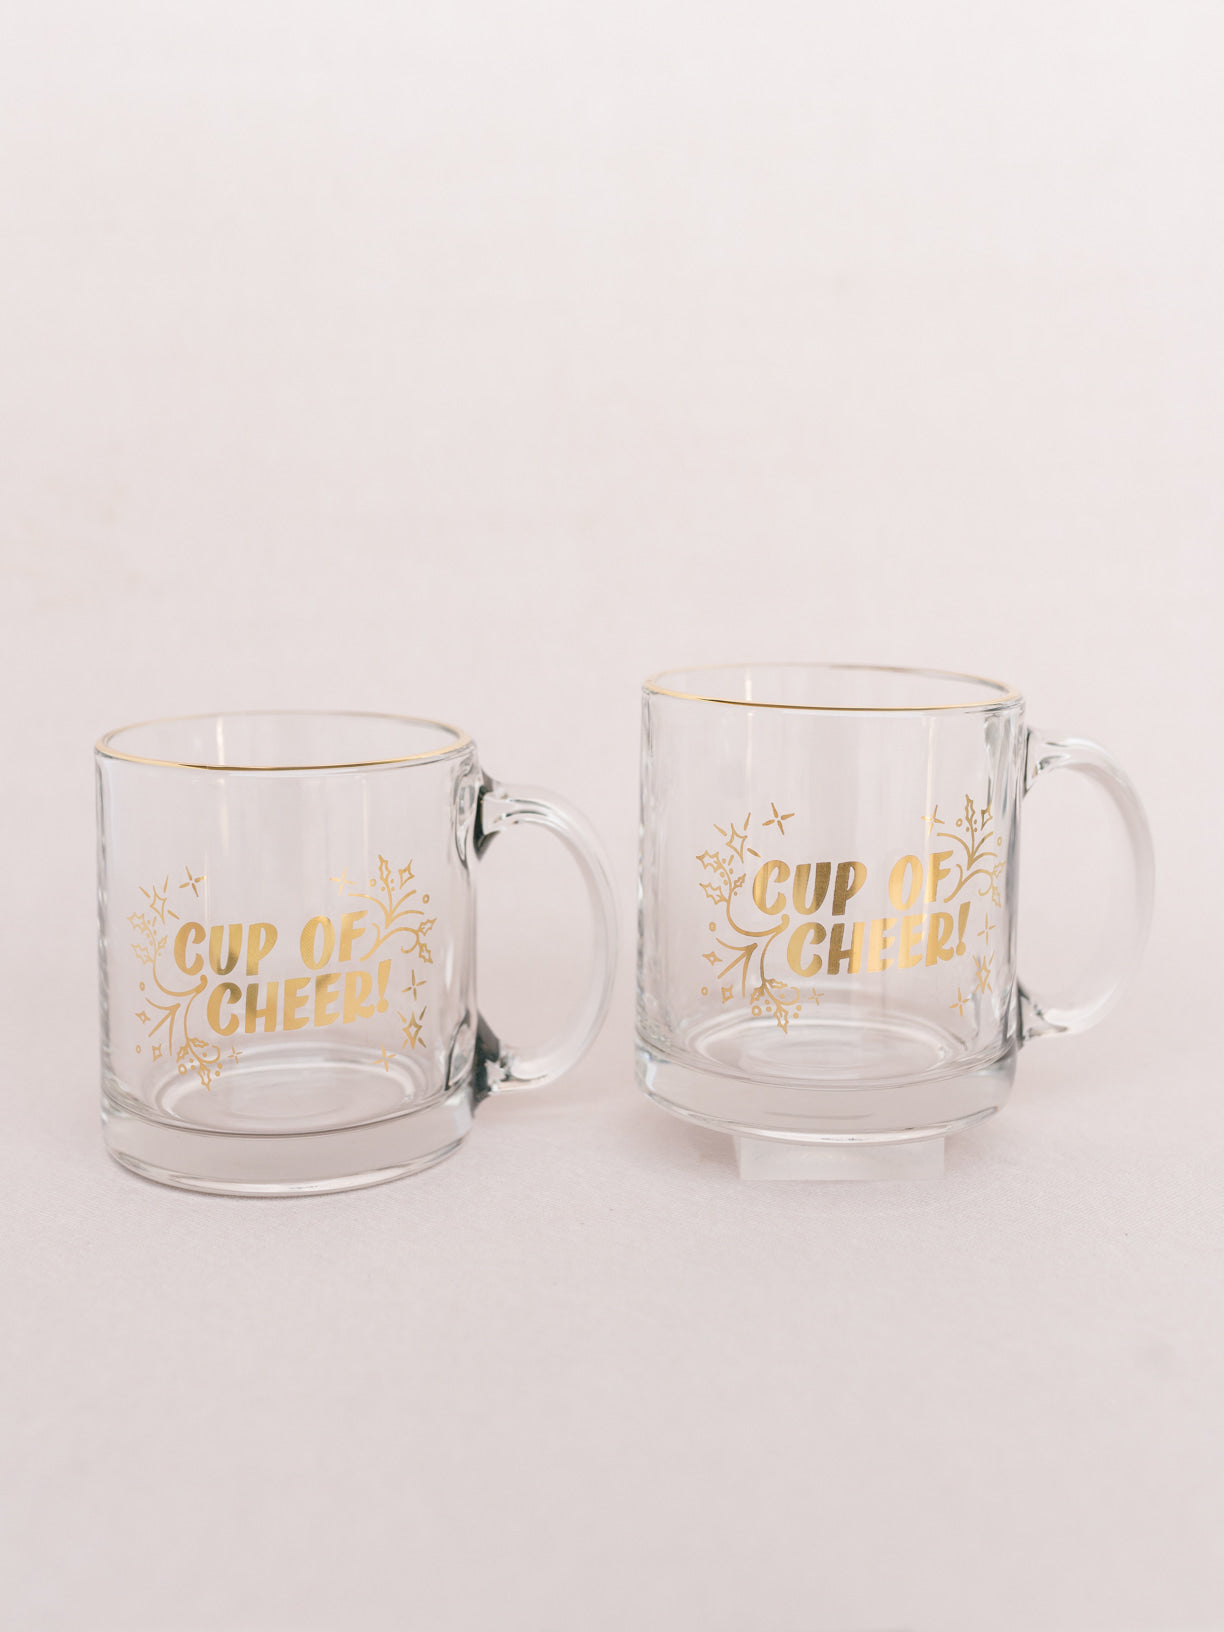 SECONDS Cup of Cheer Gold Clear Glass Mug